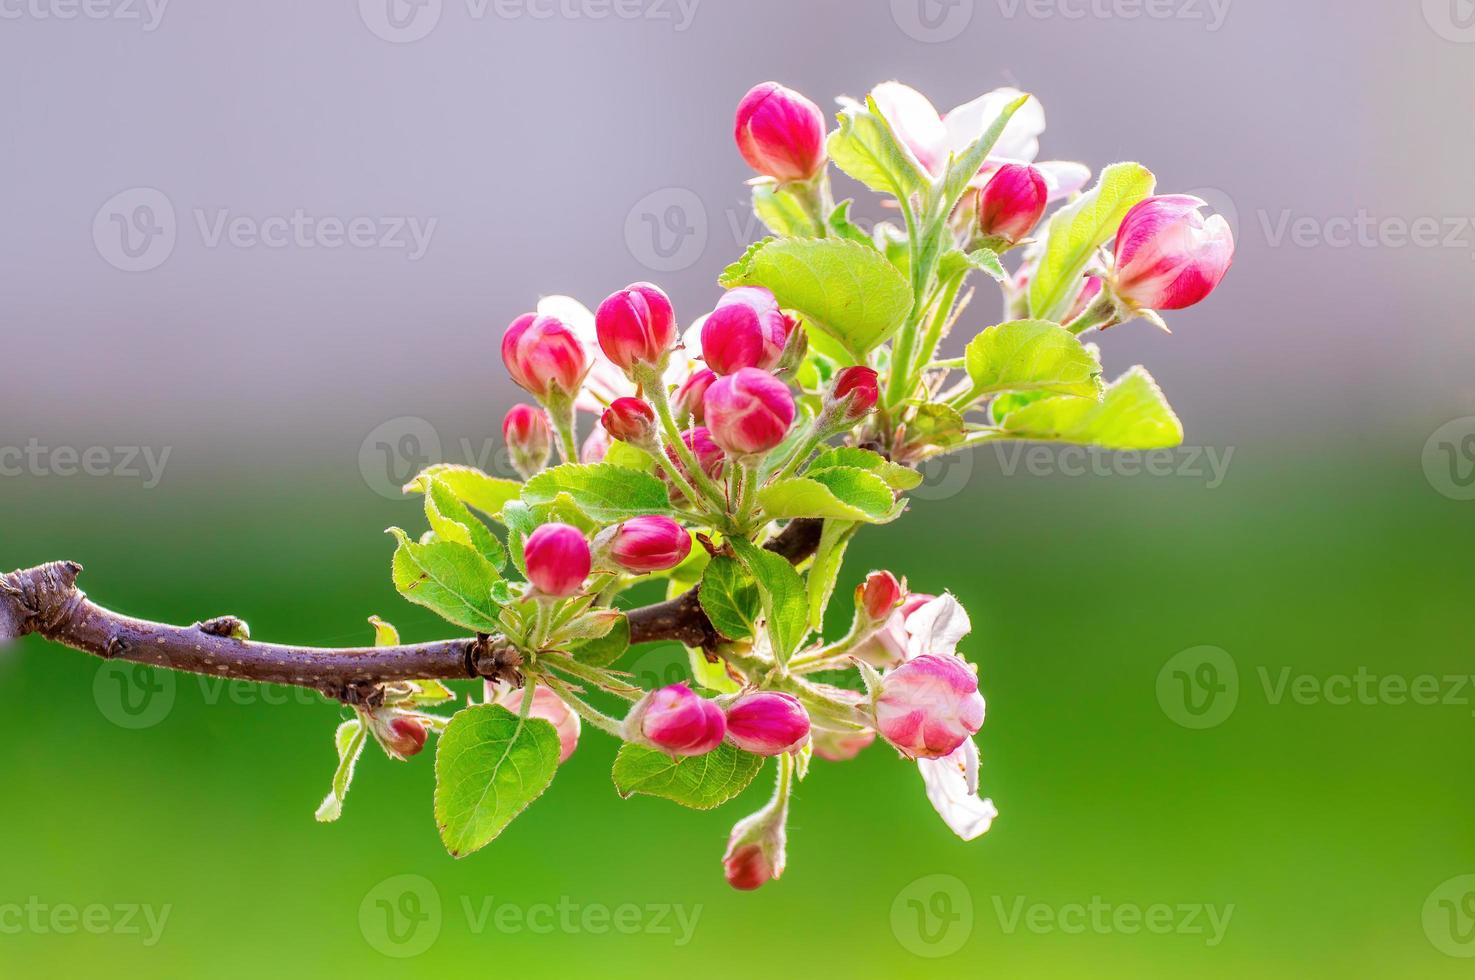 abranch with Apple blossoms photo